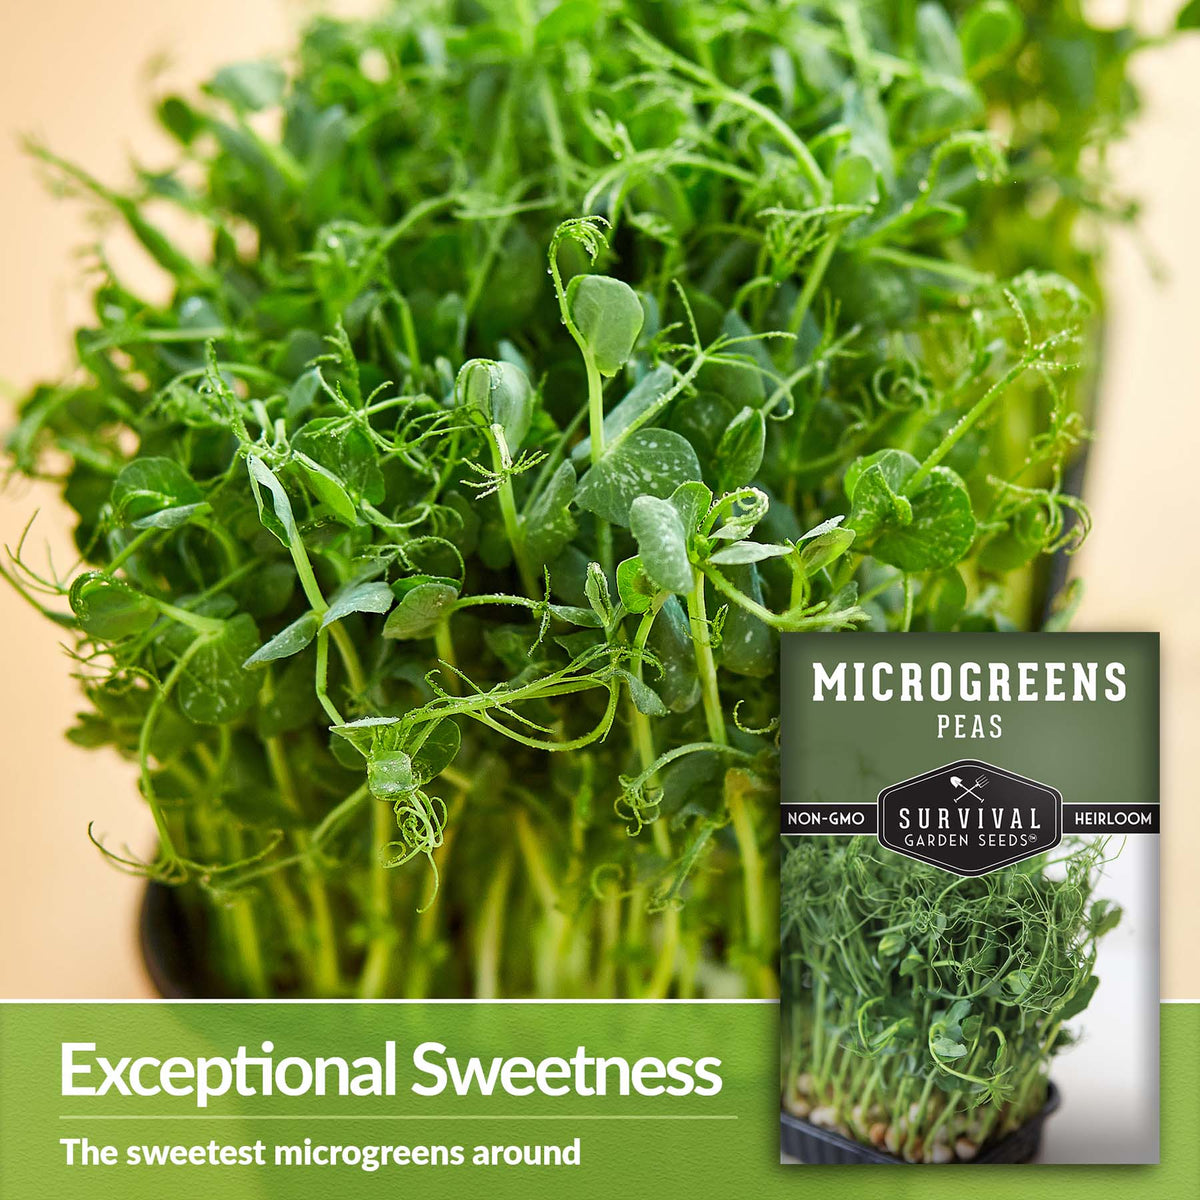 Pea Microgreens are exceptionally sweet